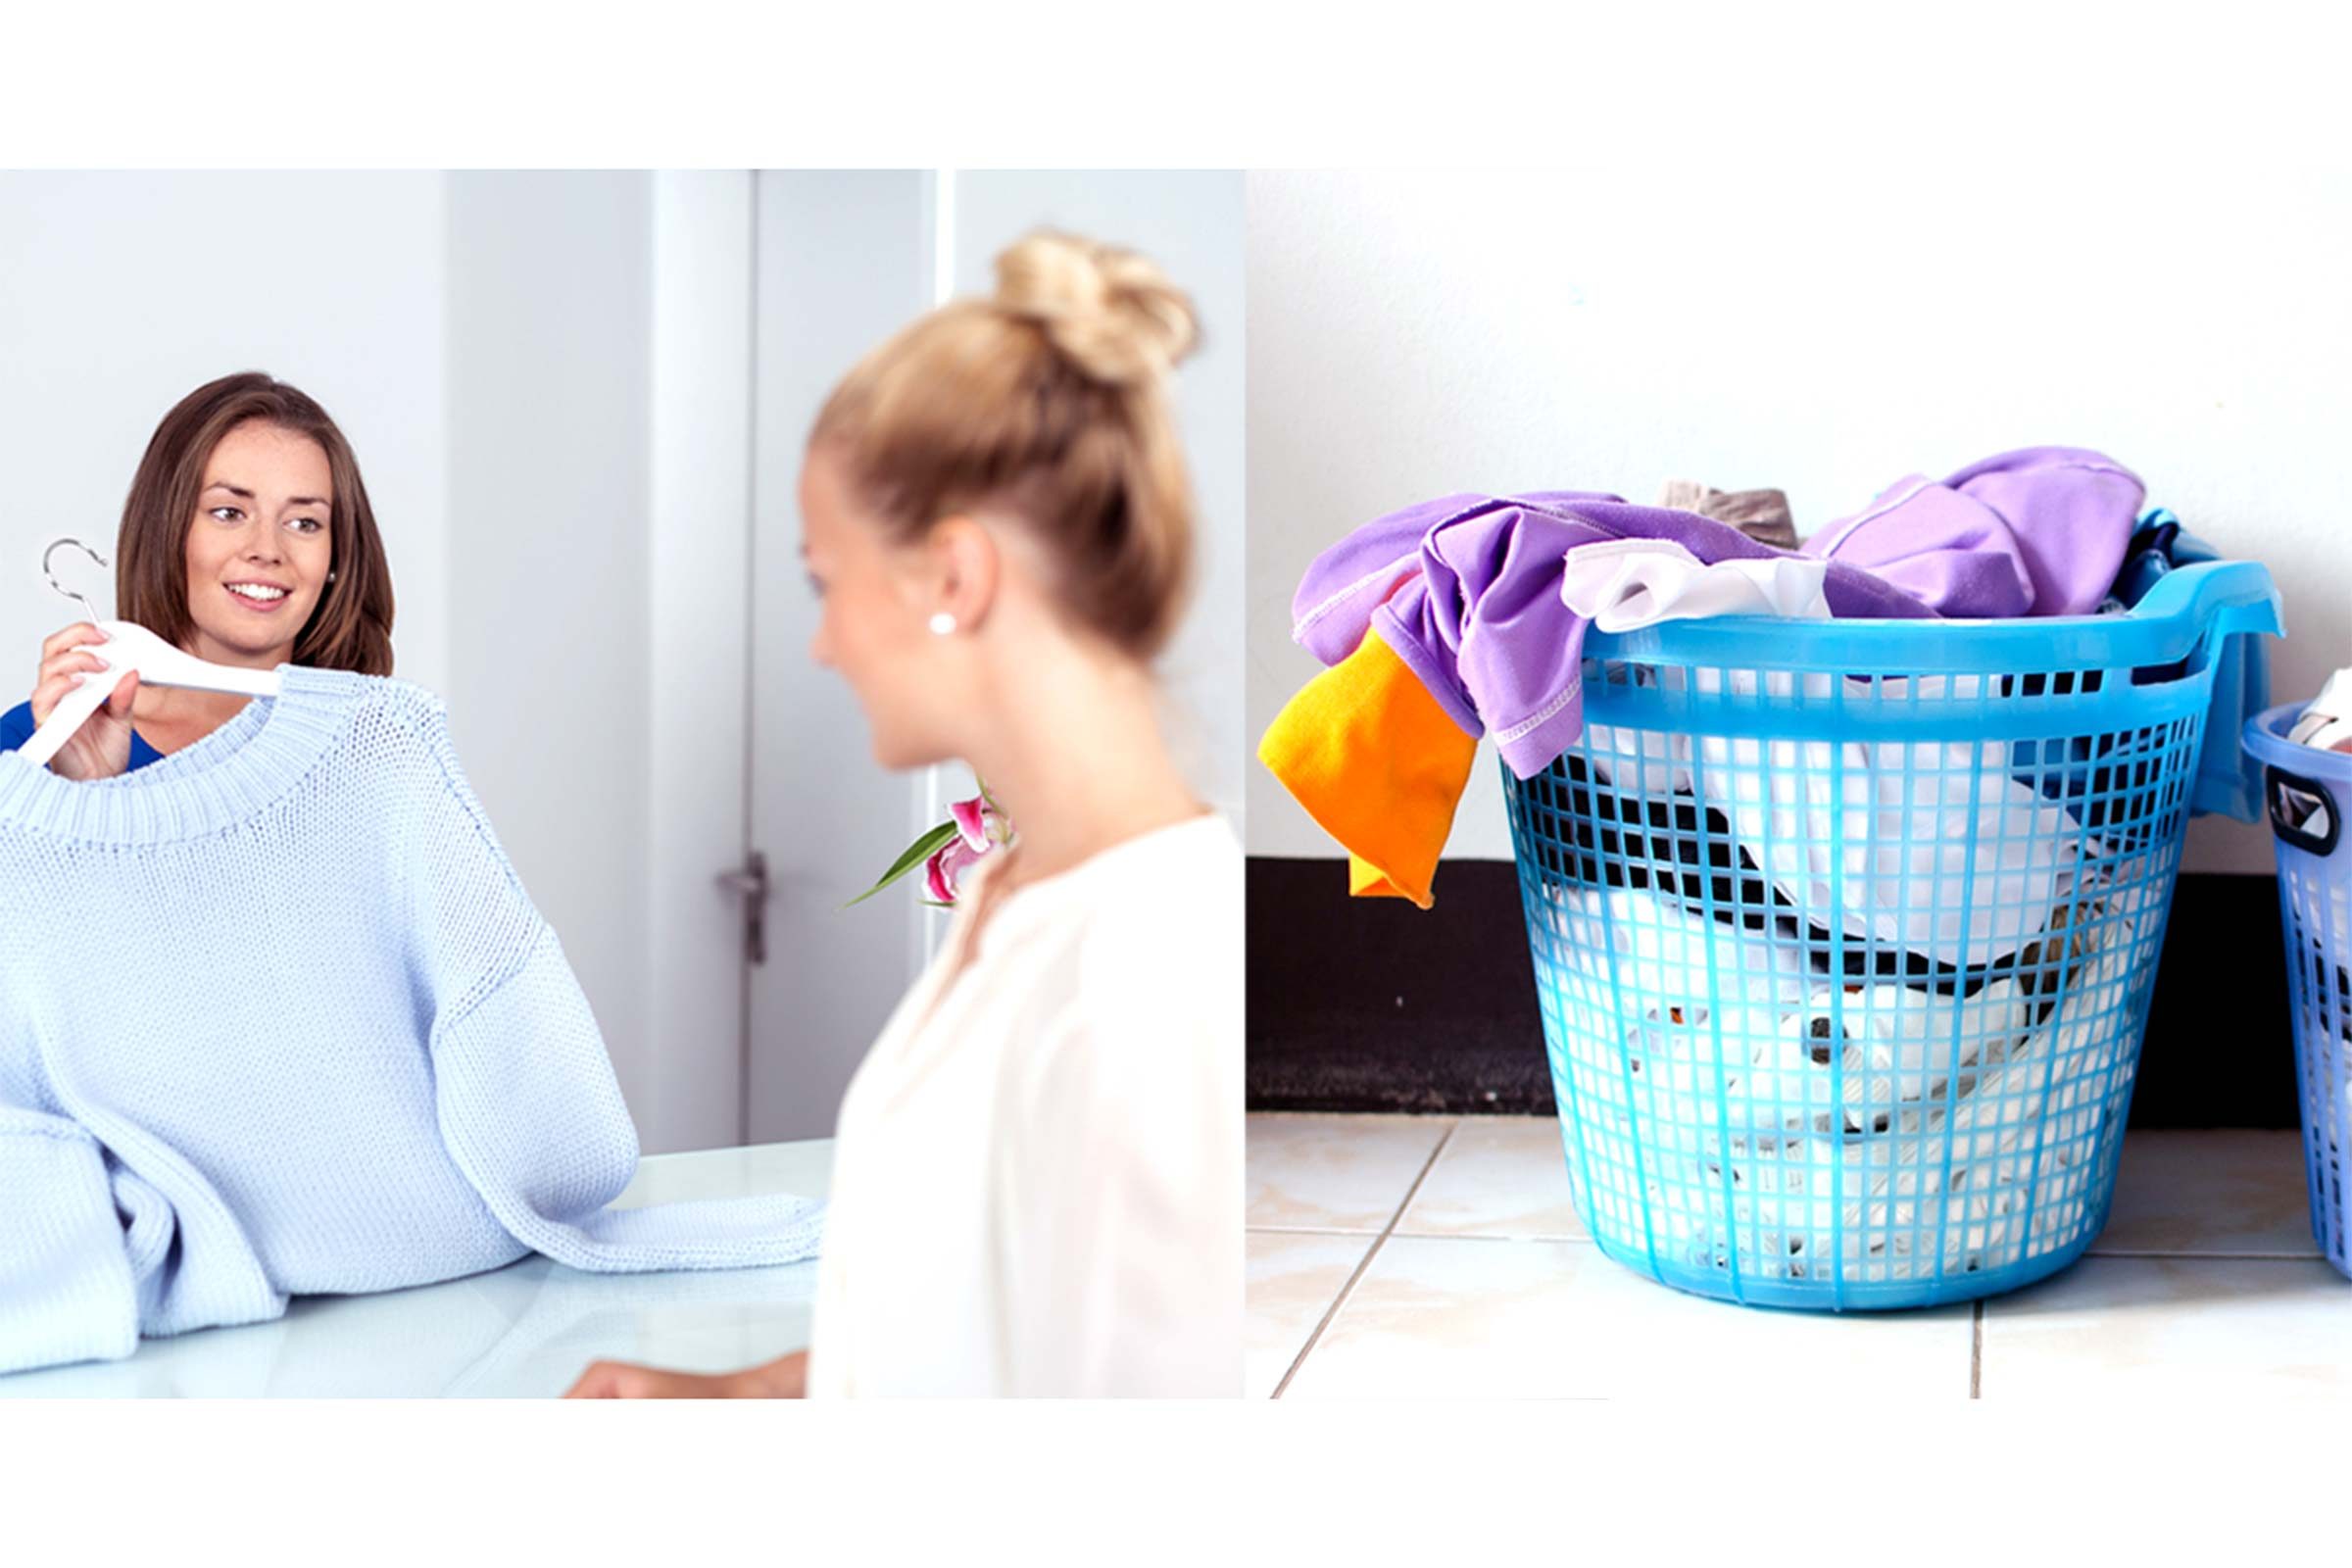 3 Reasons Why You Should Wash Your New Clothes Before Wearing Them